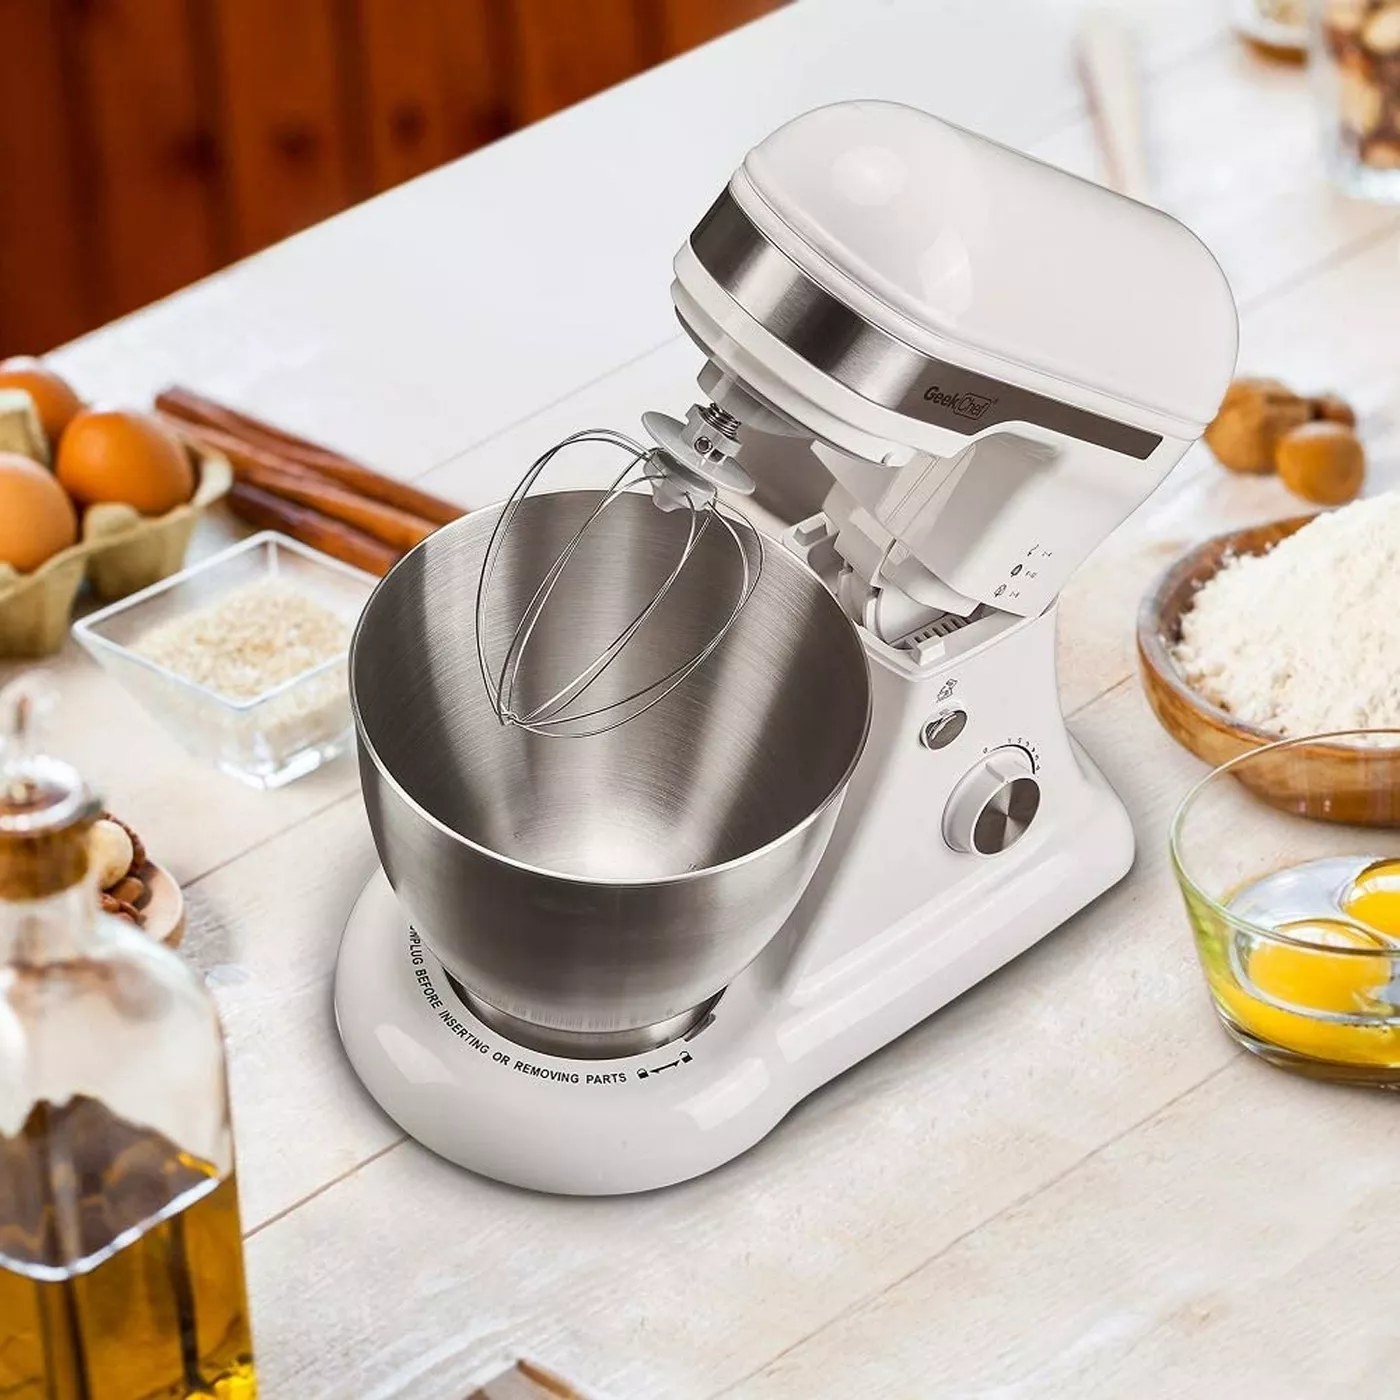 The white stand mixer